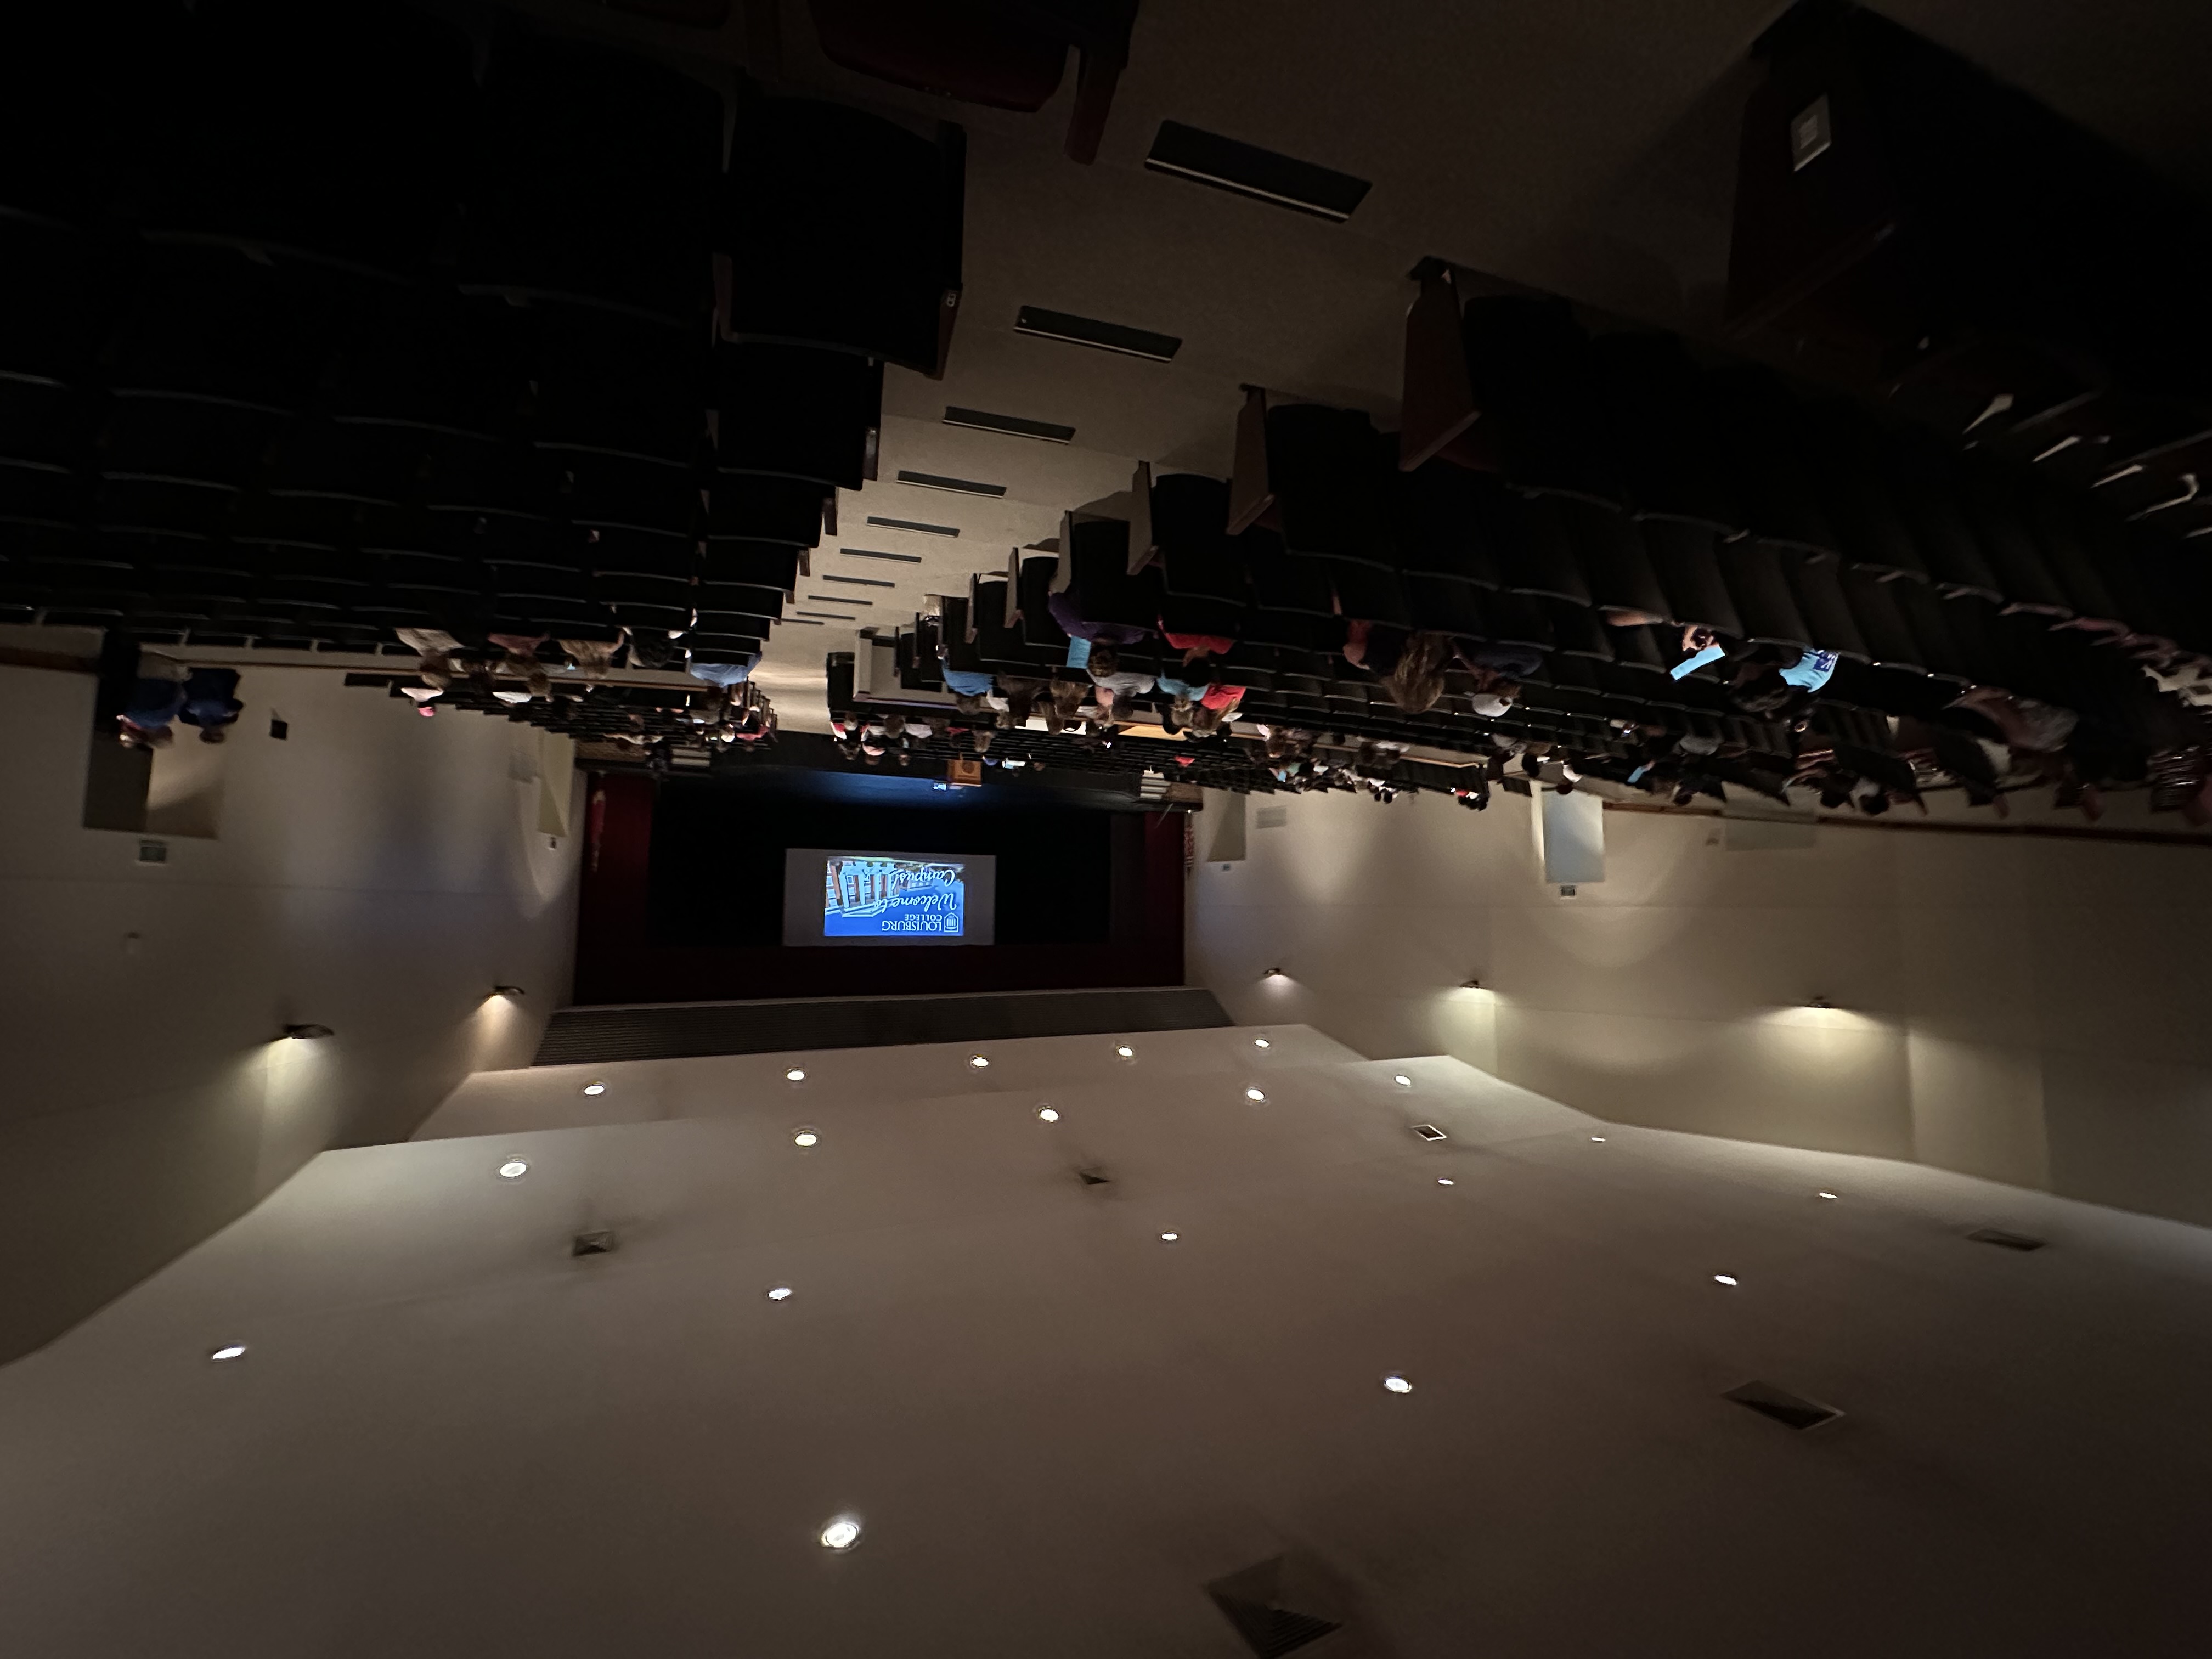 Wide angle view from back of auditorium.